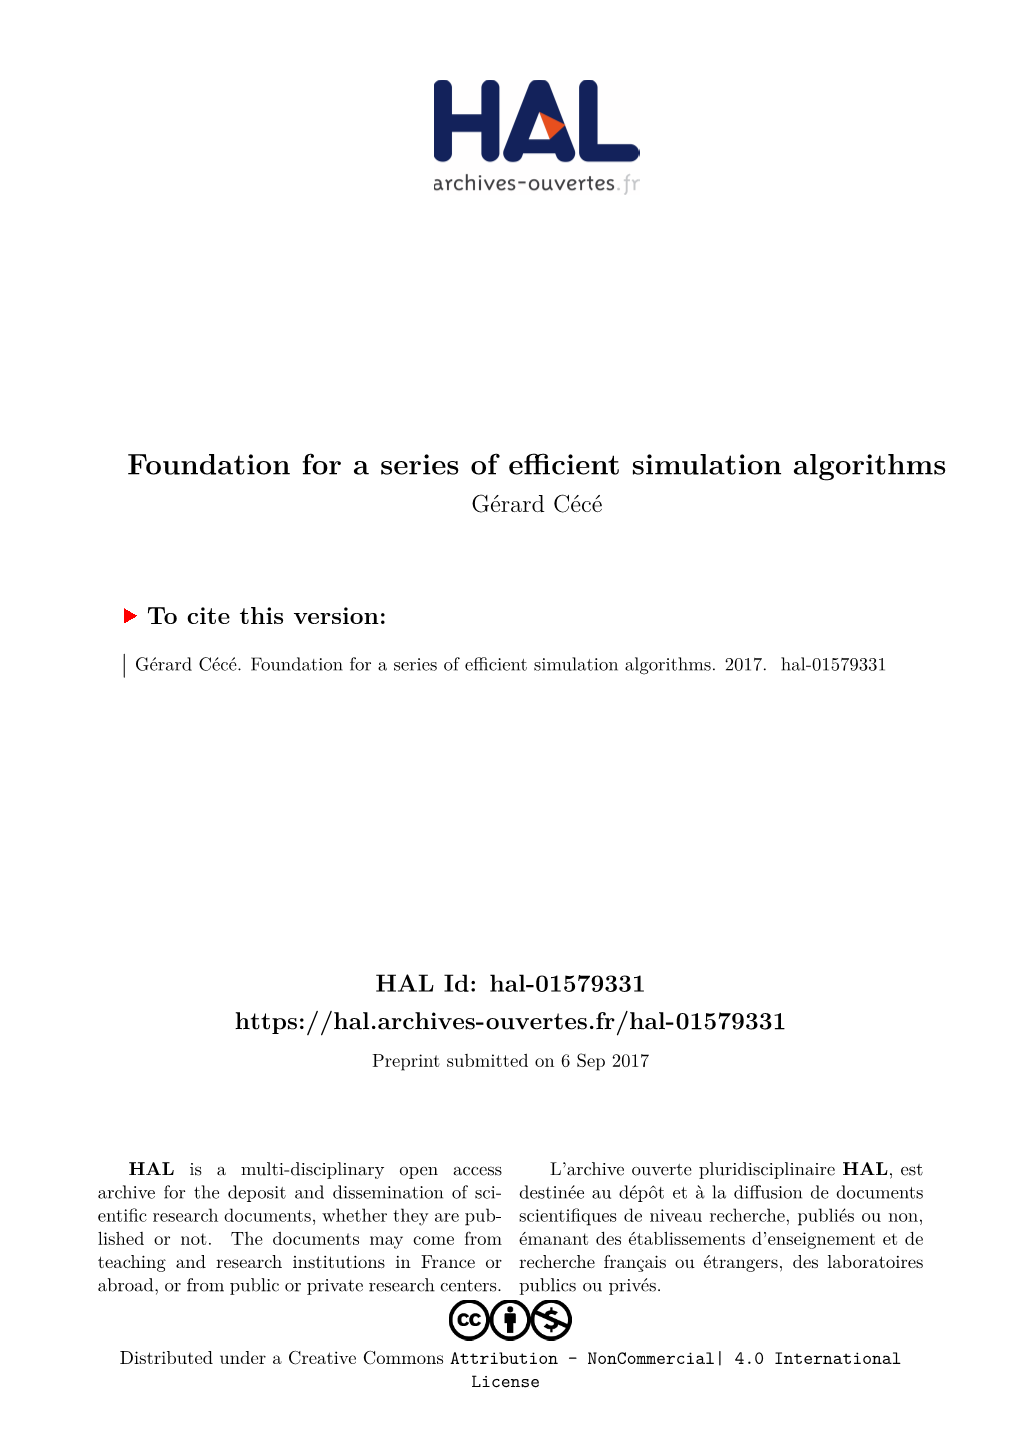 Foundation for a Series of Efficient Simulation Algorithms